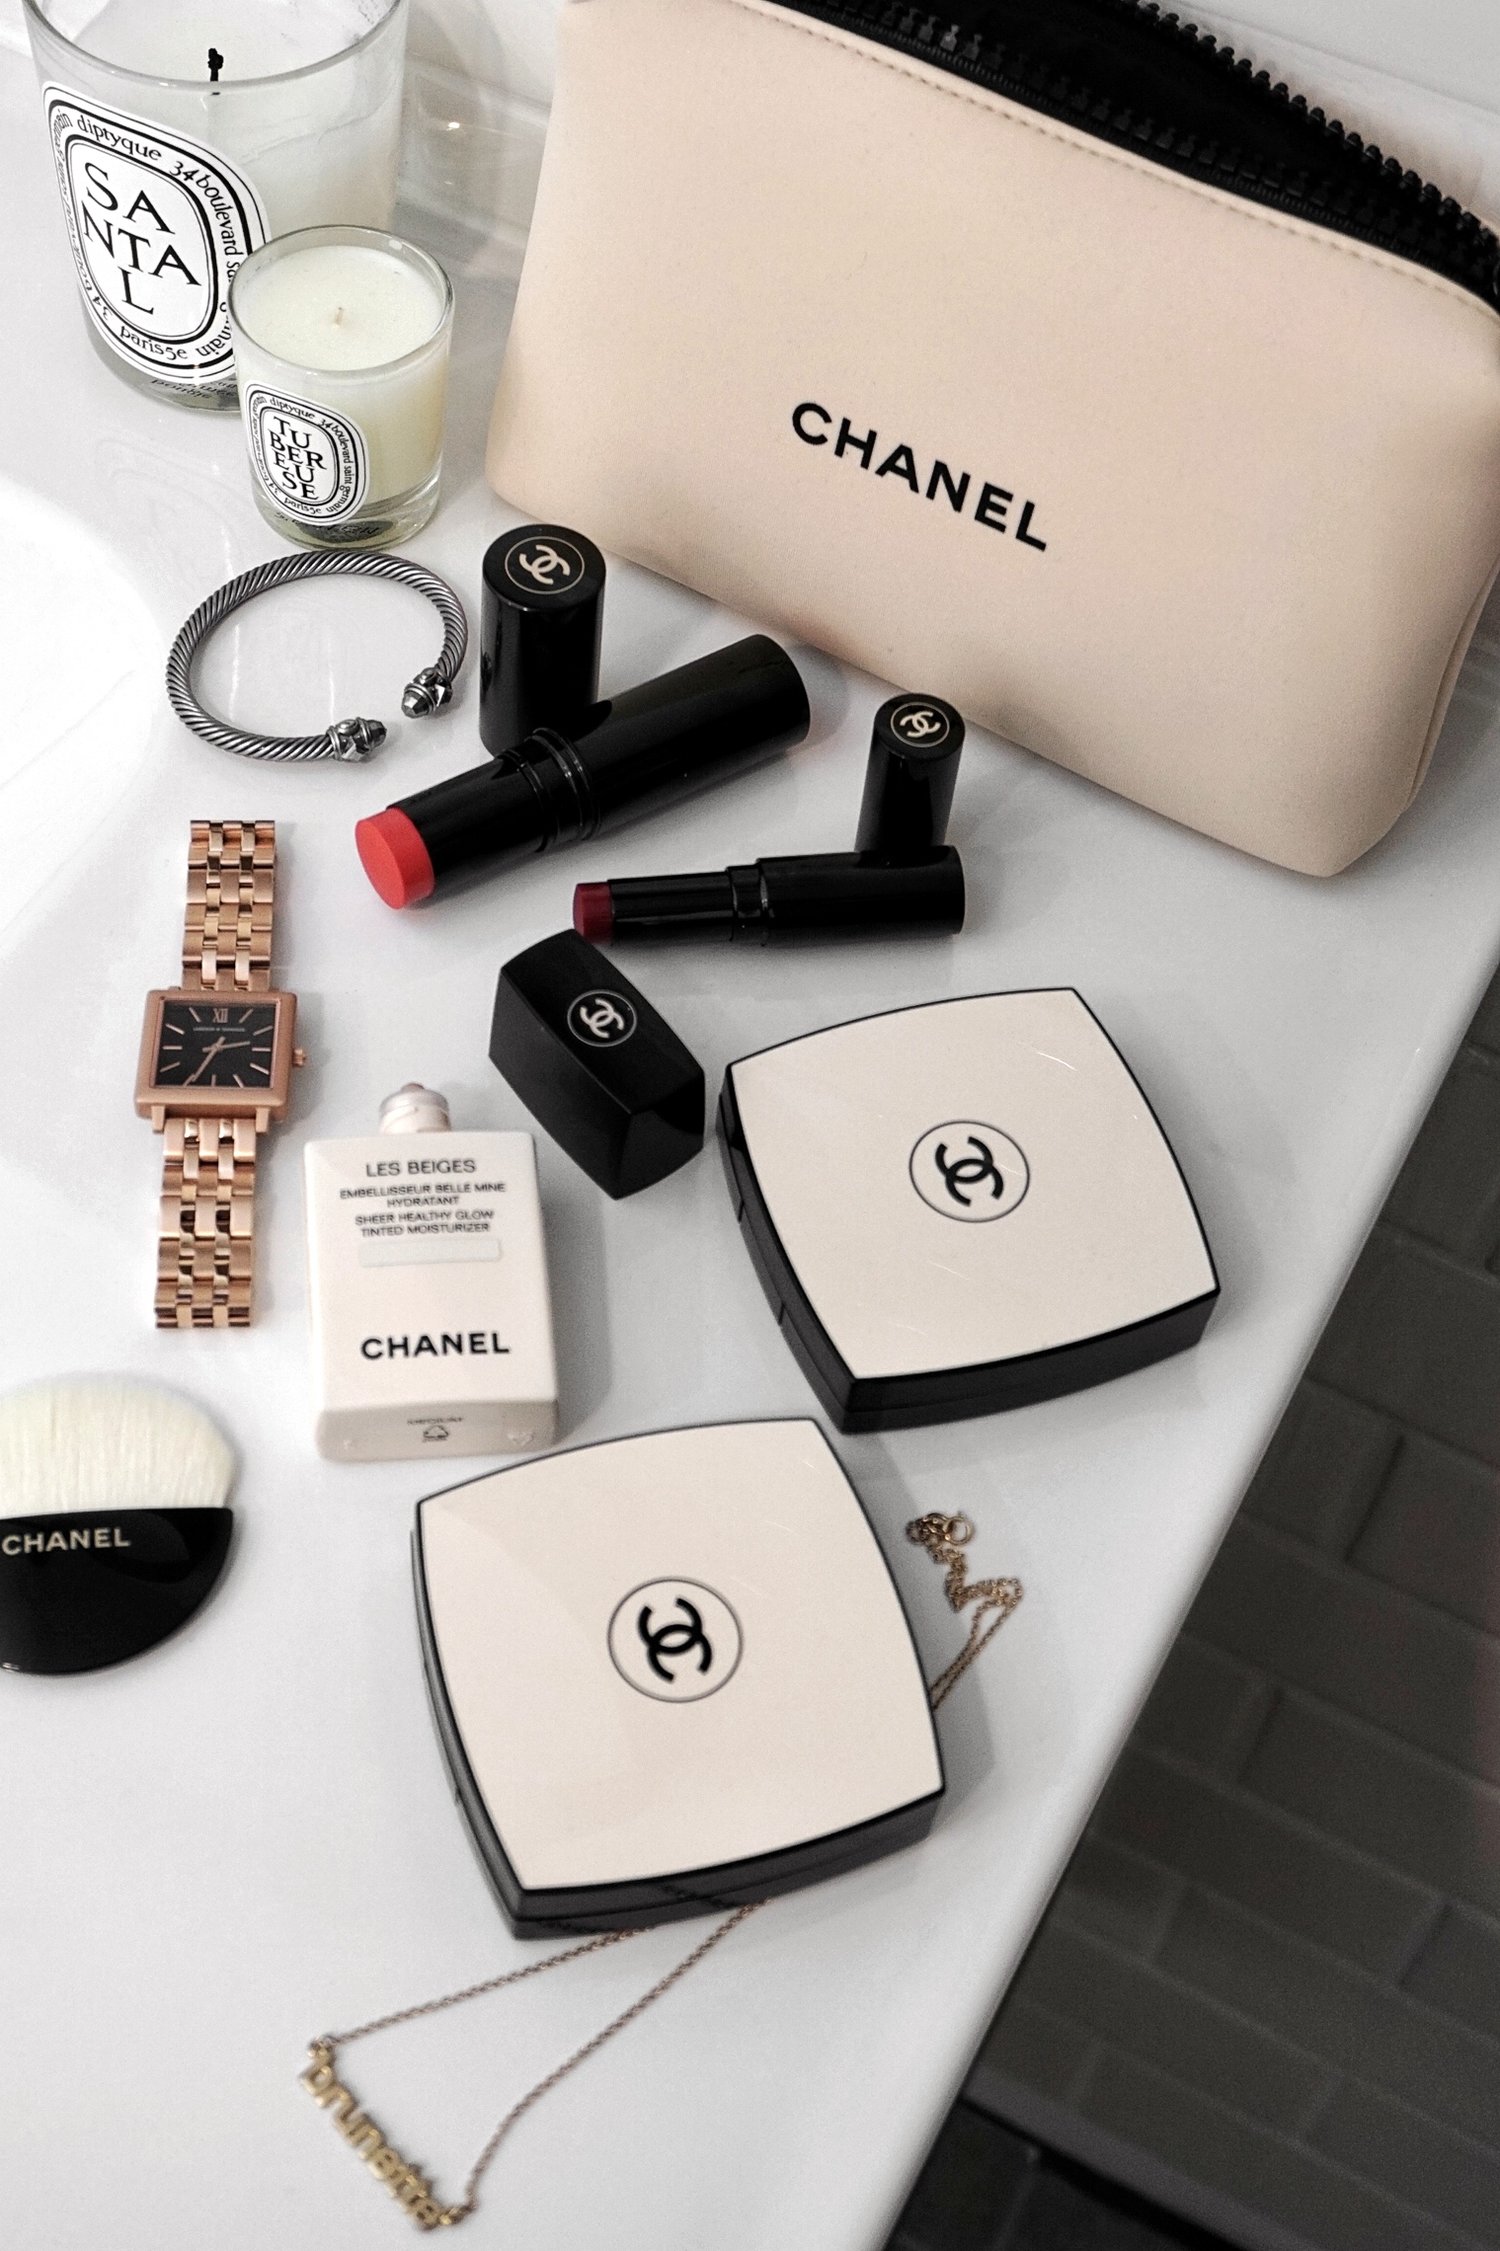 CHANEL Les Beiges 2018 (Chanel Beauty)